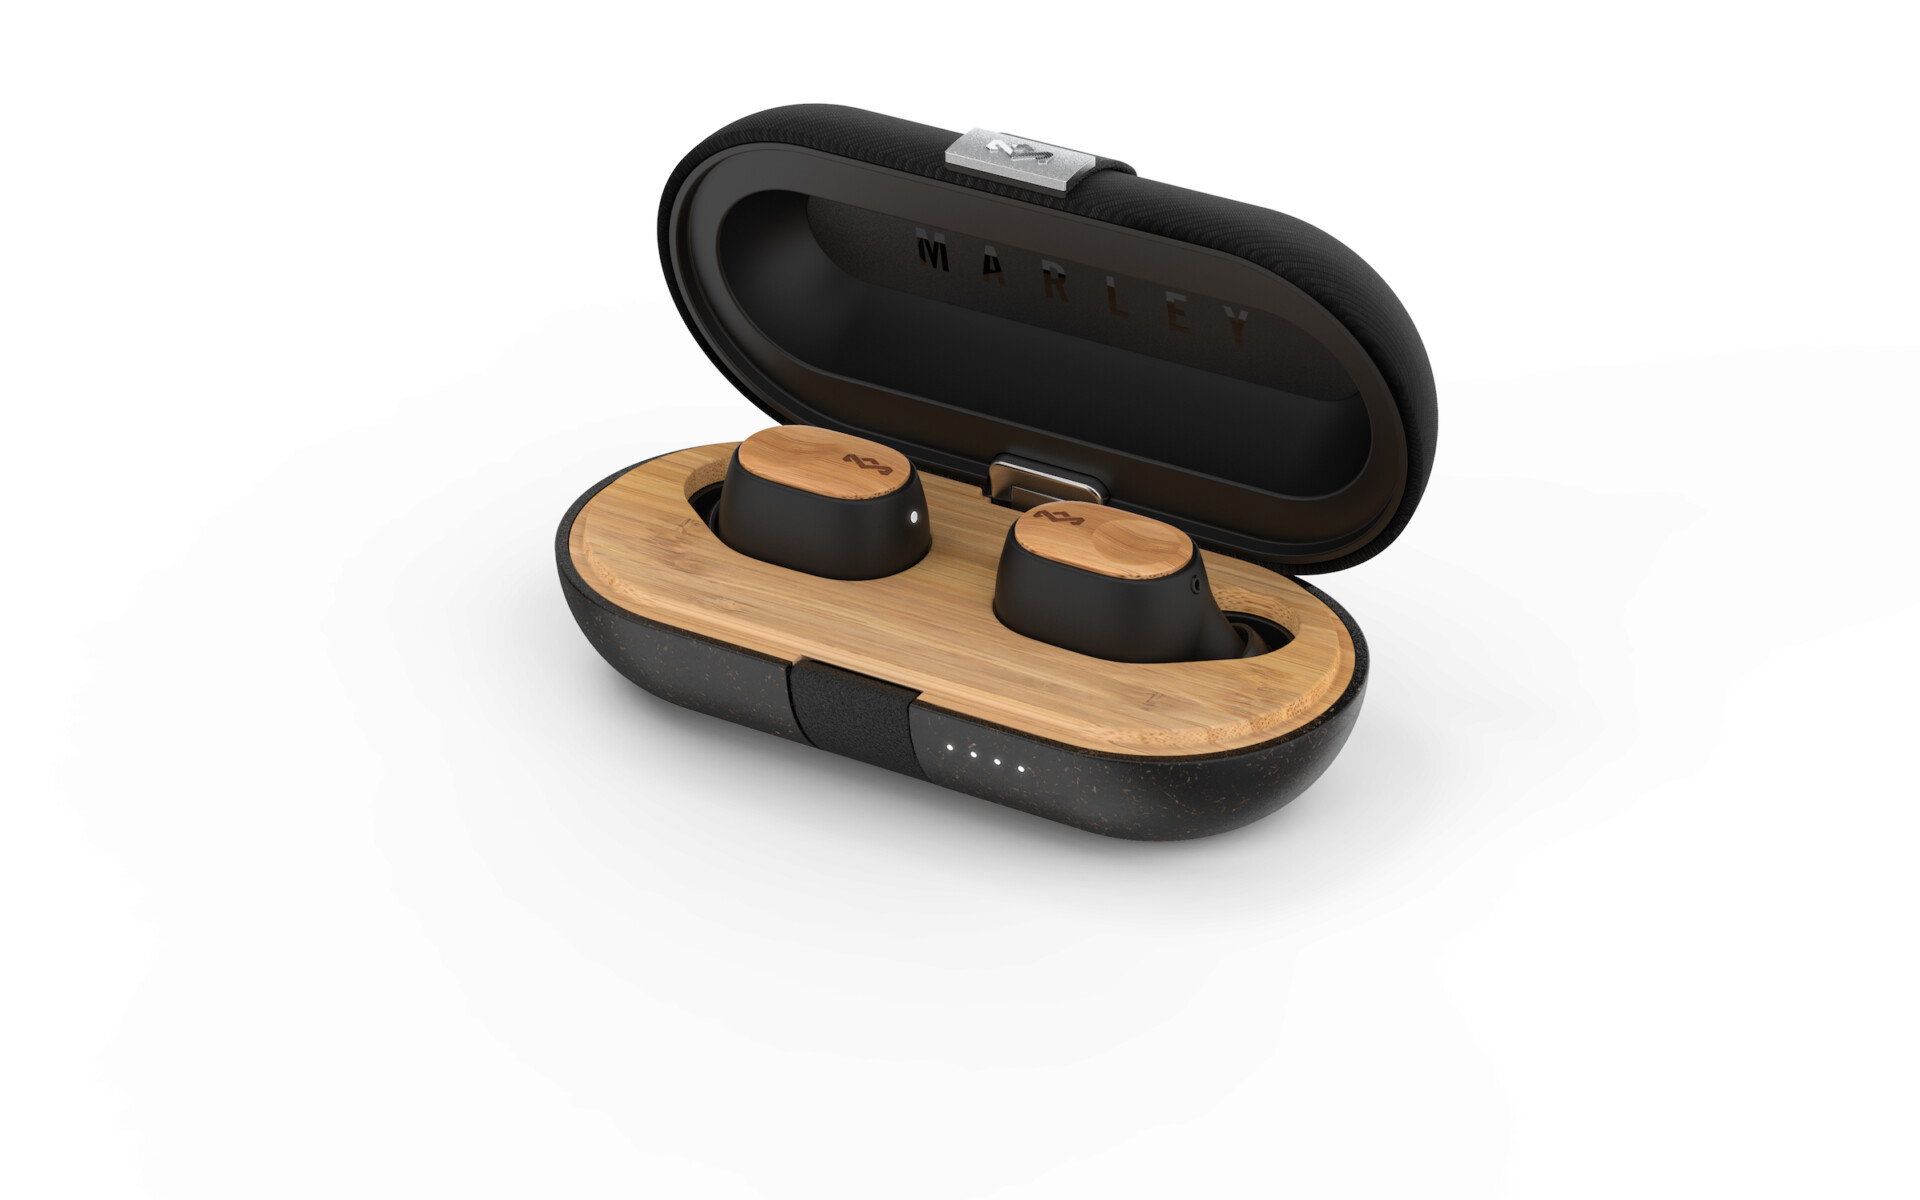 House of House of House of Marley Liberate Air true wireless earbuds in charging case on white background.